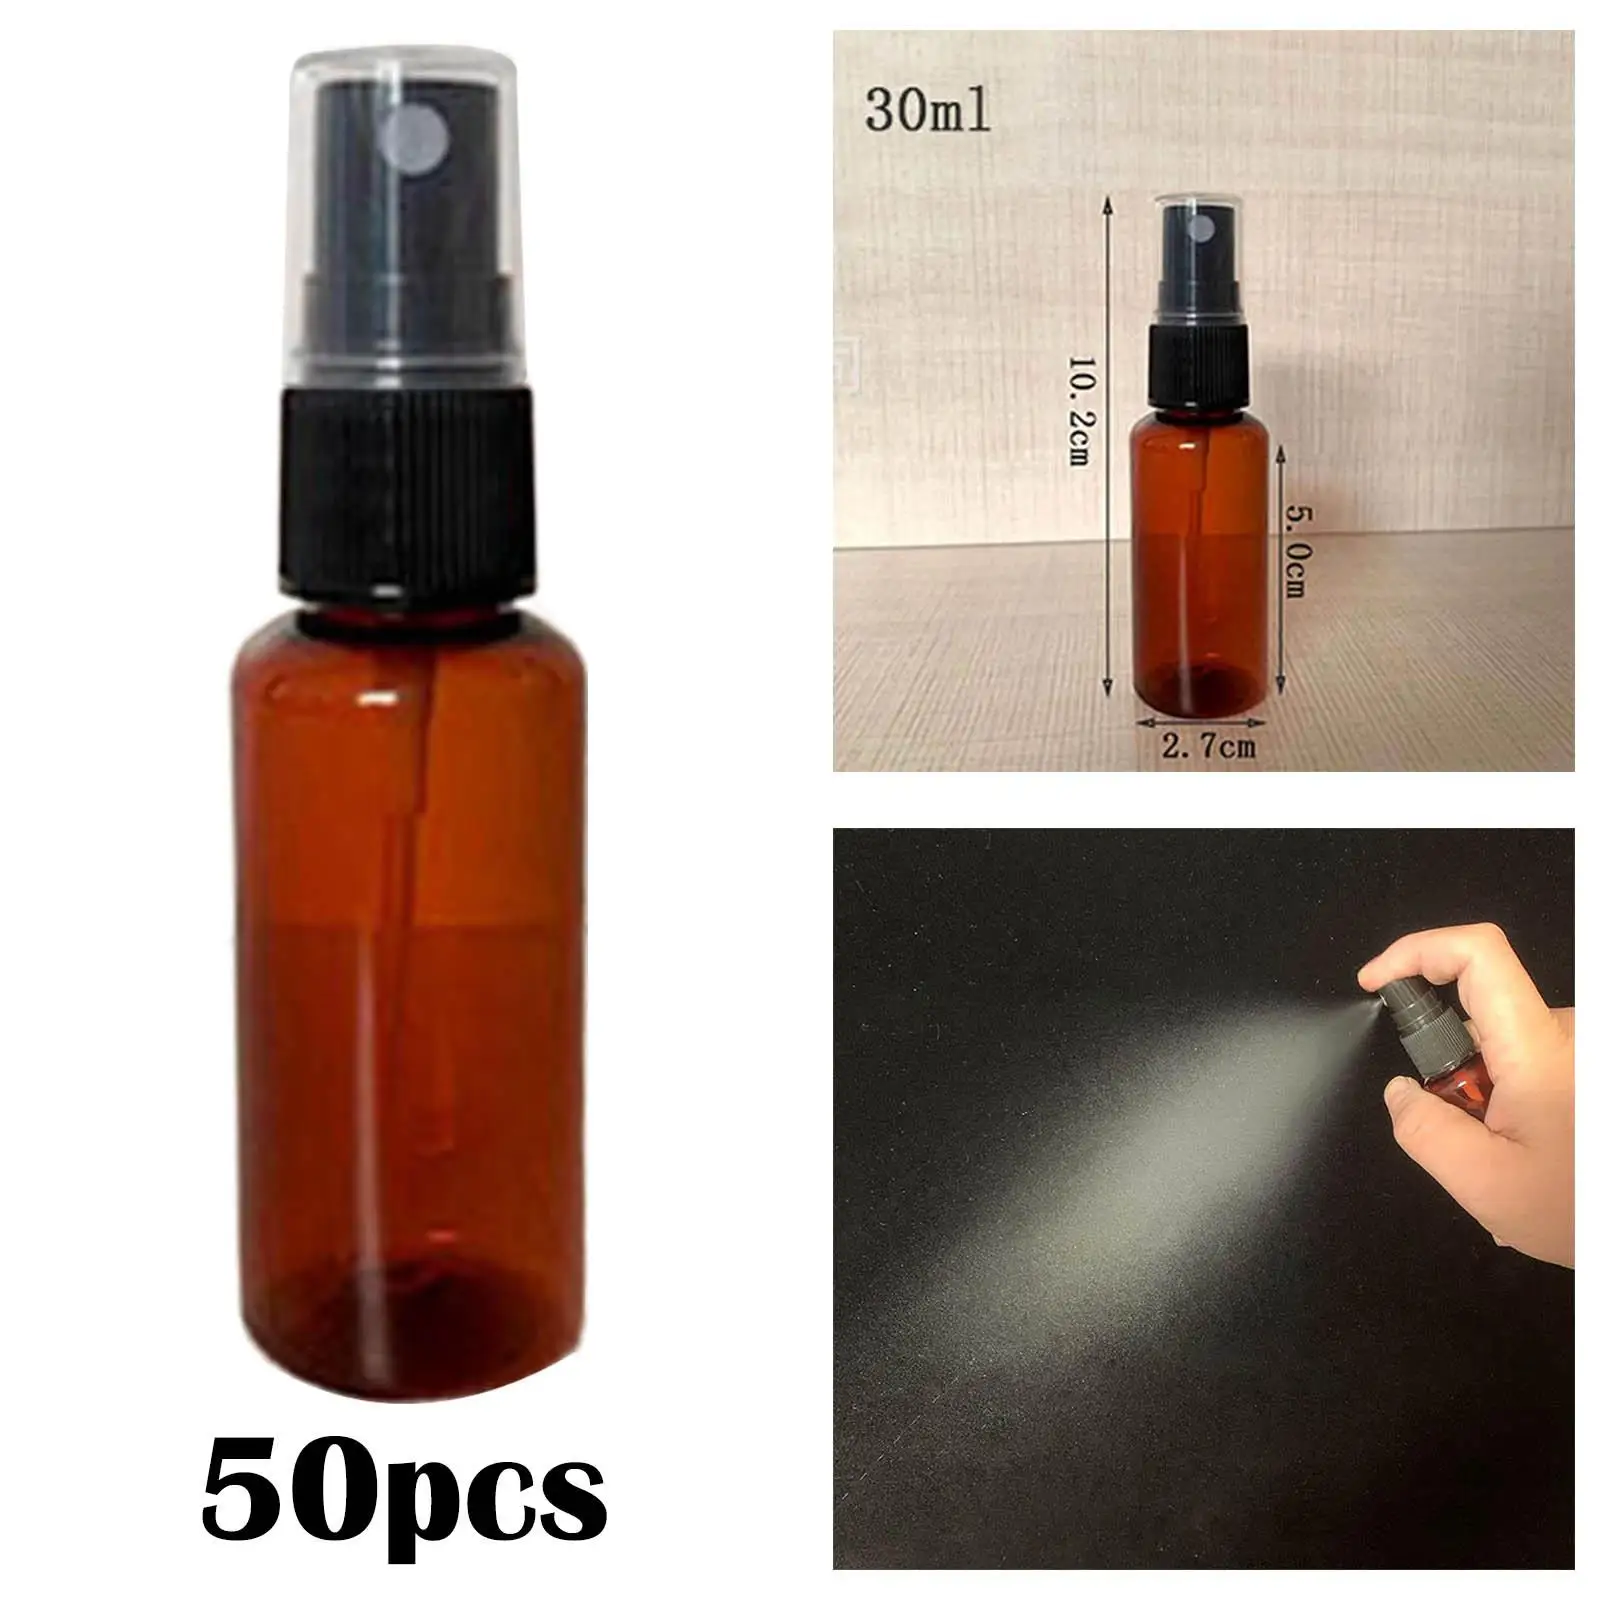 50Pcs Spray Bottle Cosmetic Bottle Portable 30ml Fine Mist Liquid Container Refillable Makeup Sprayer Household with Cover Mini